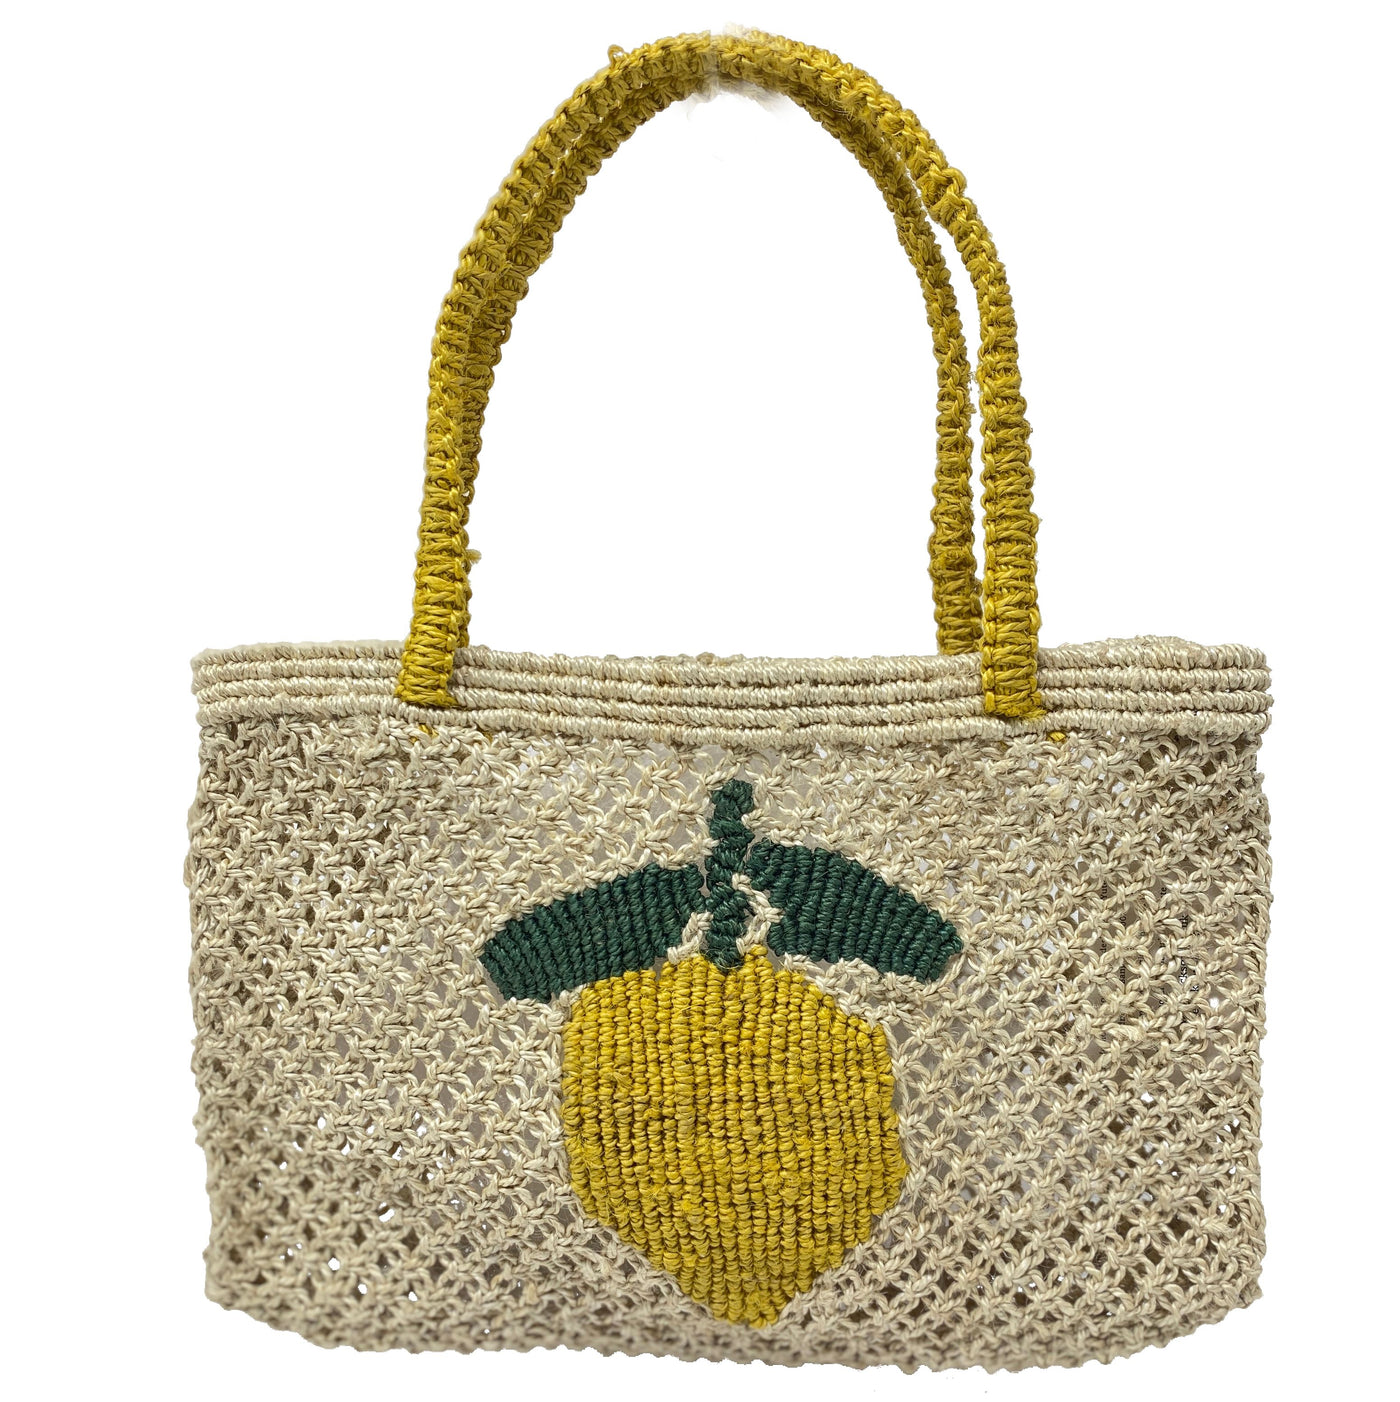 Lemon - Natural, yellow and green (arriving end of May)